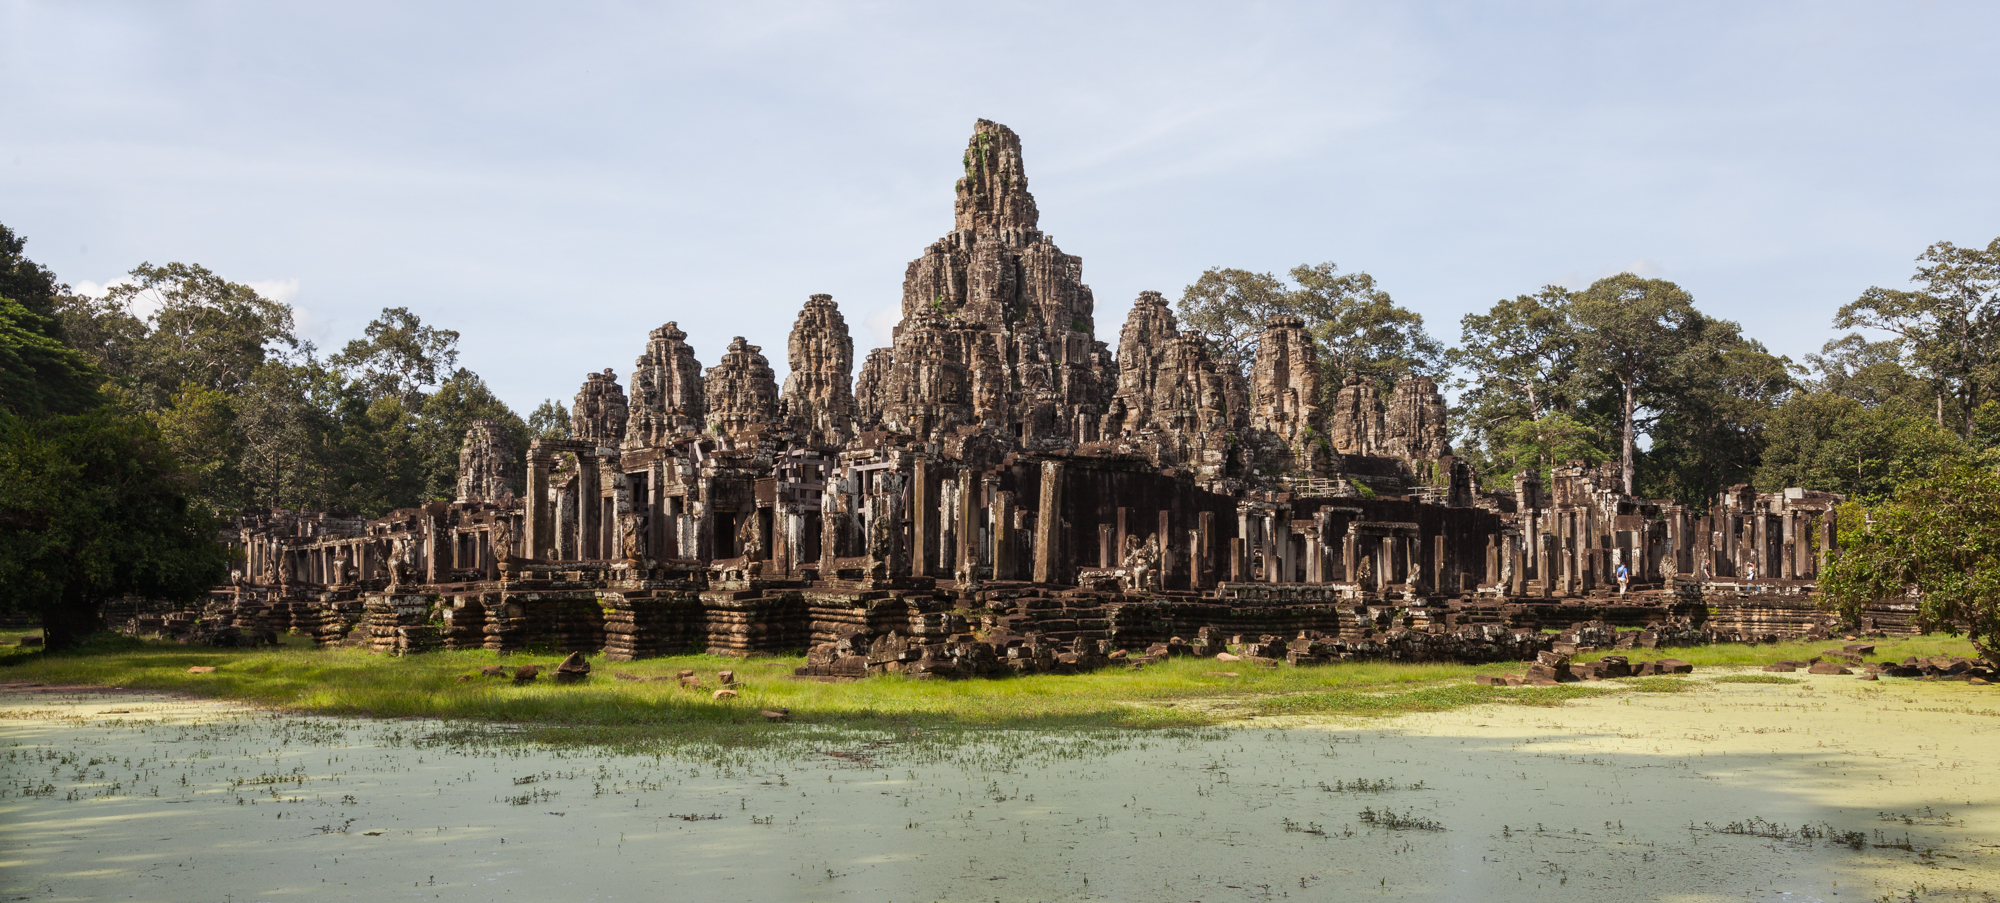 Bayon, Khmer temple constructed in the late 12th or early 13th century and located in the ancient city of Angkor, today Cambodia.